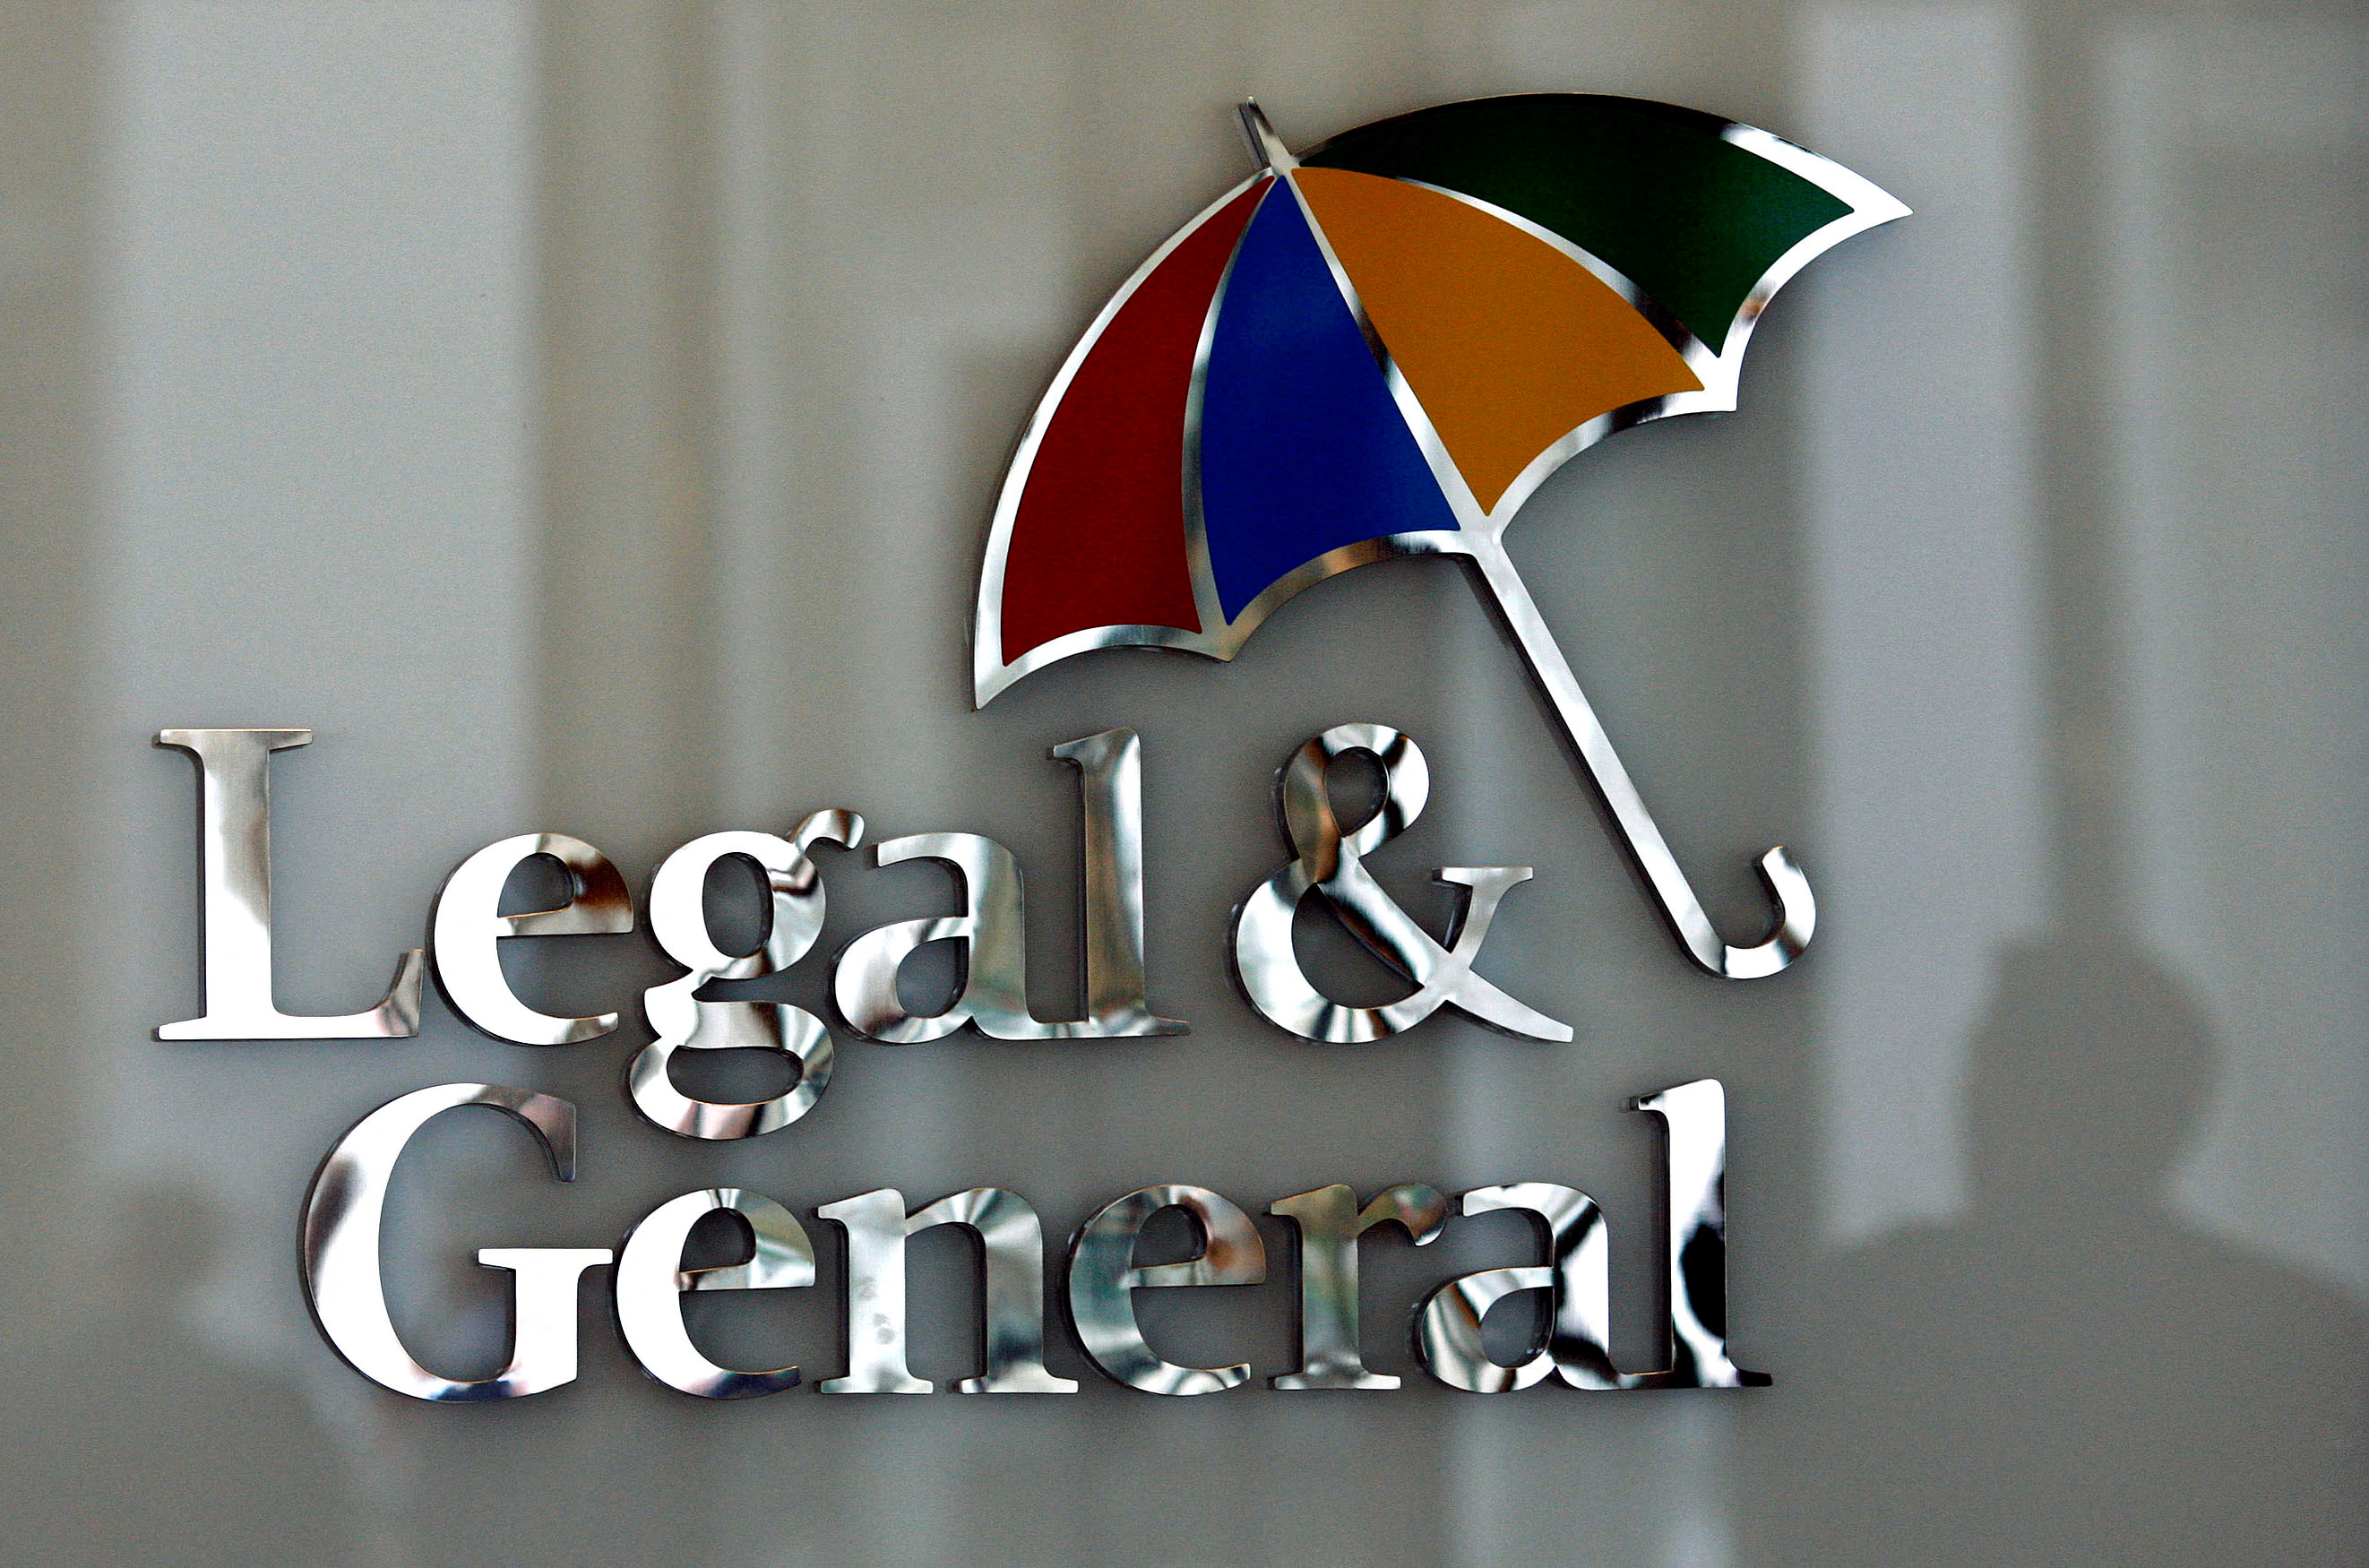 The logo of Legal & General insurance company is seen at their office in central London